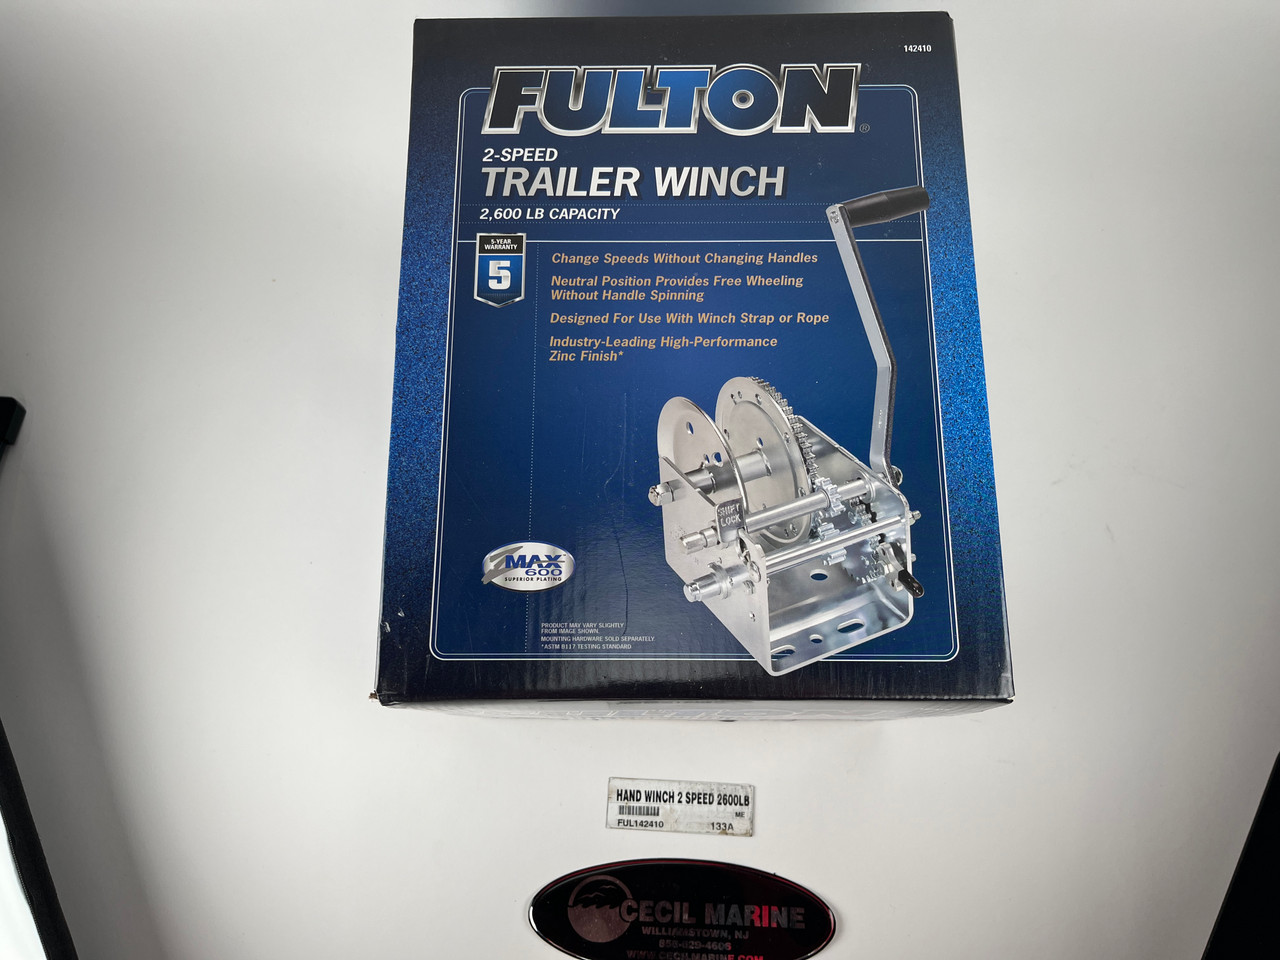 HAND WINCH 2 SPEED 2600LB no tax* (FUL142410) *IN STOCK AND READY TO SHIP!